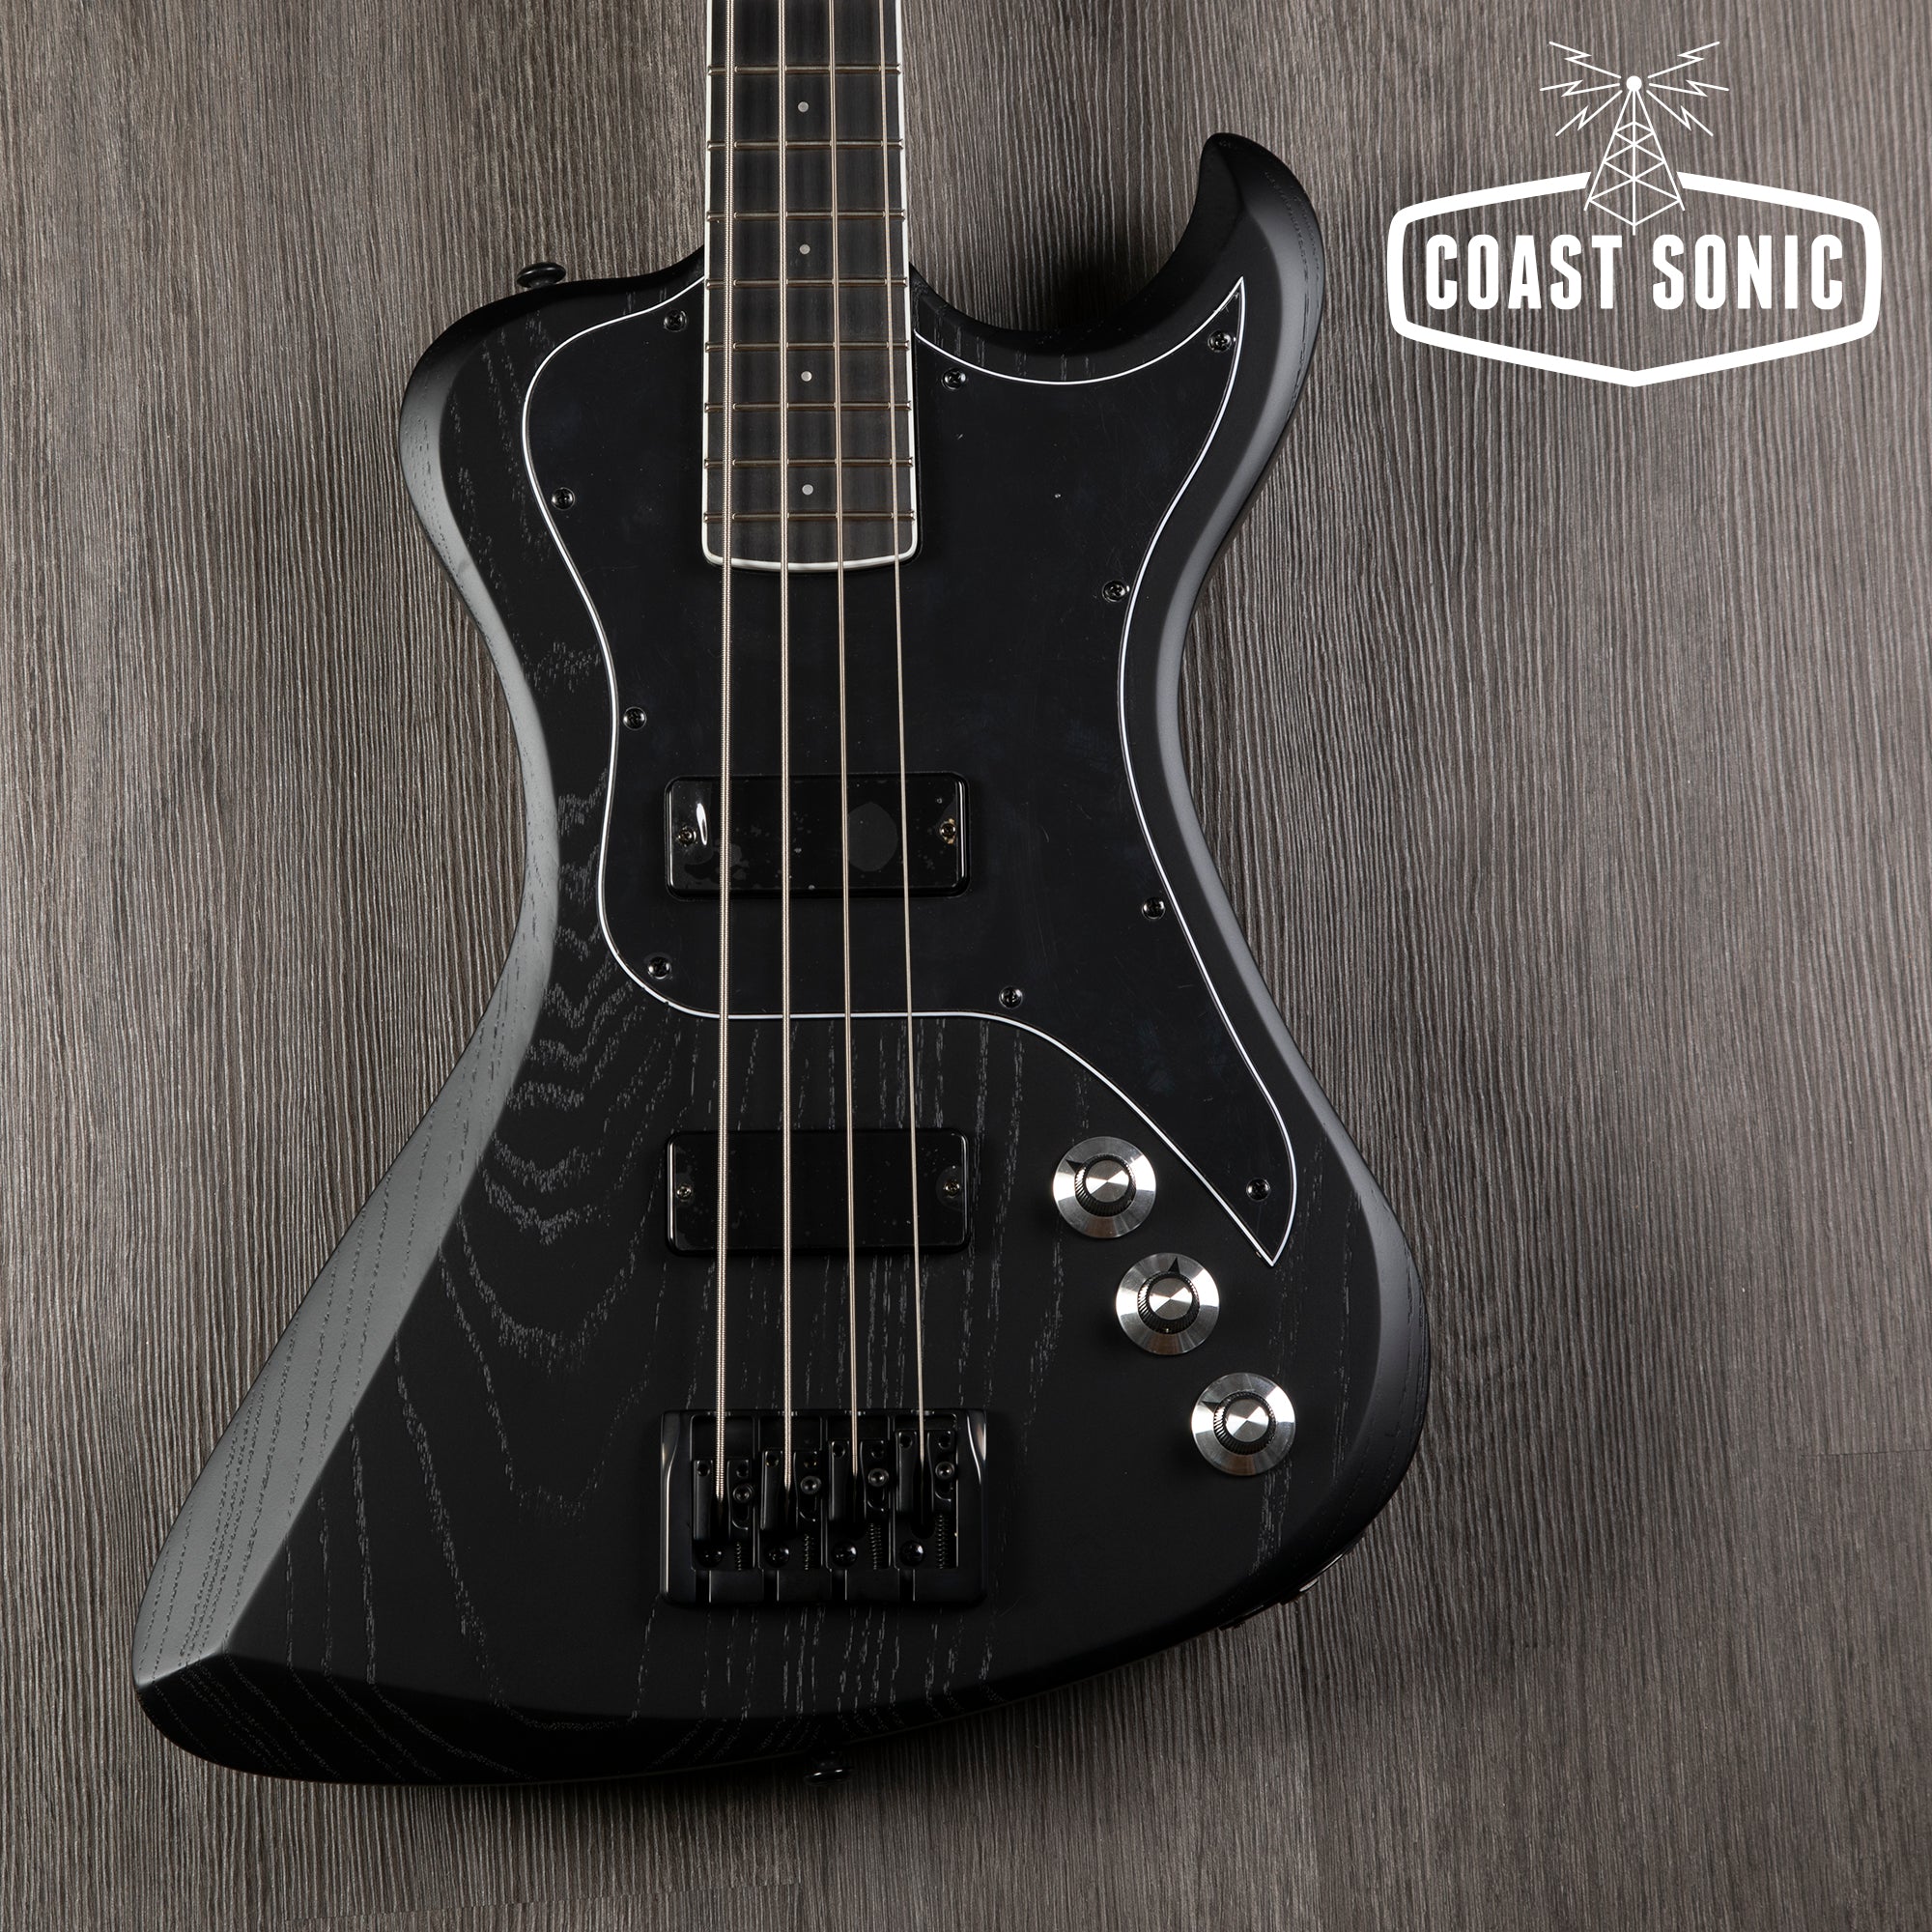 Dunable Guitars R2 DE Bass - Limited edition blacked out Swamp Ash